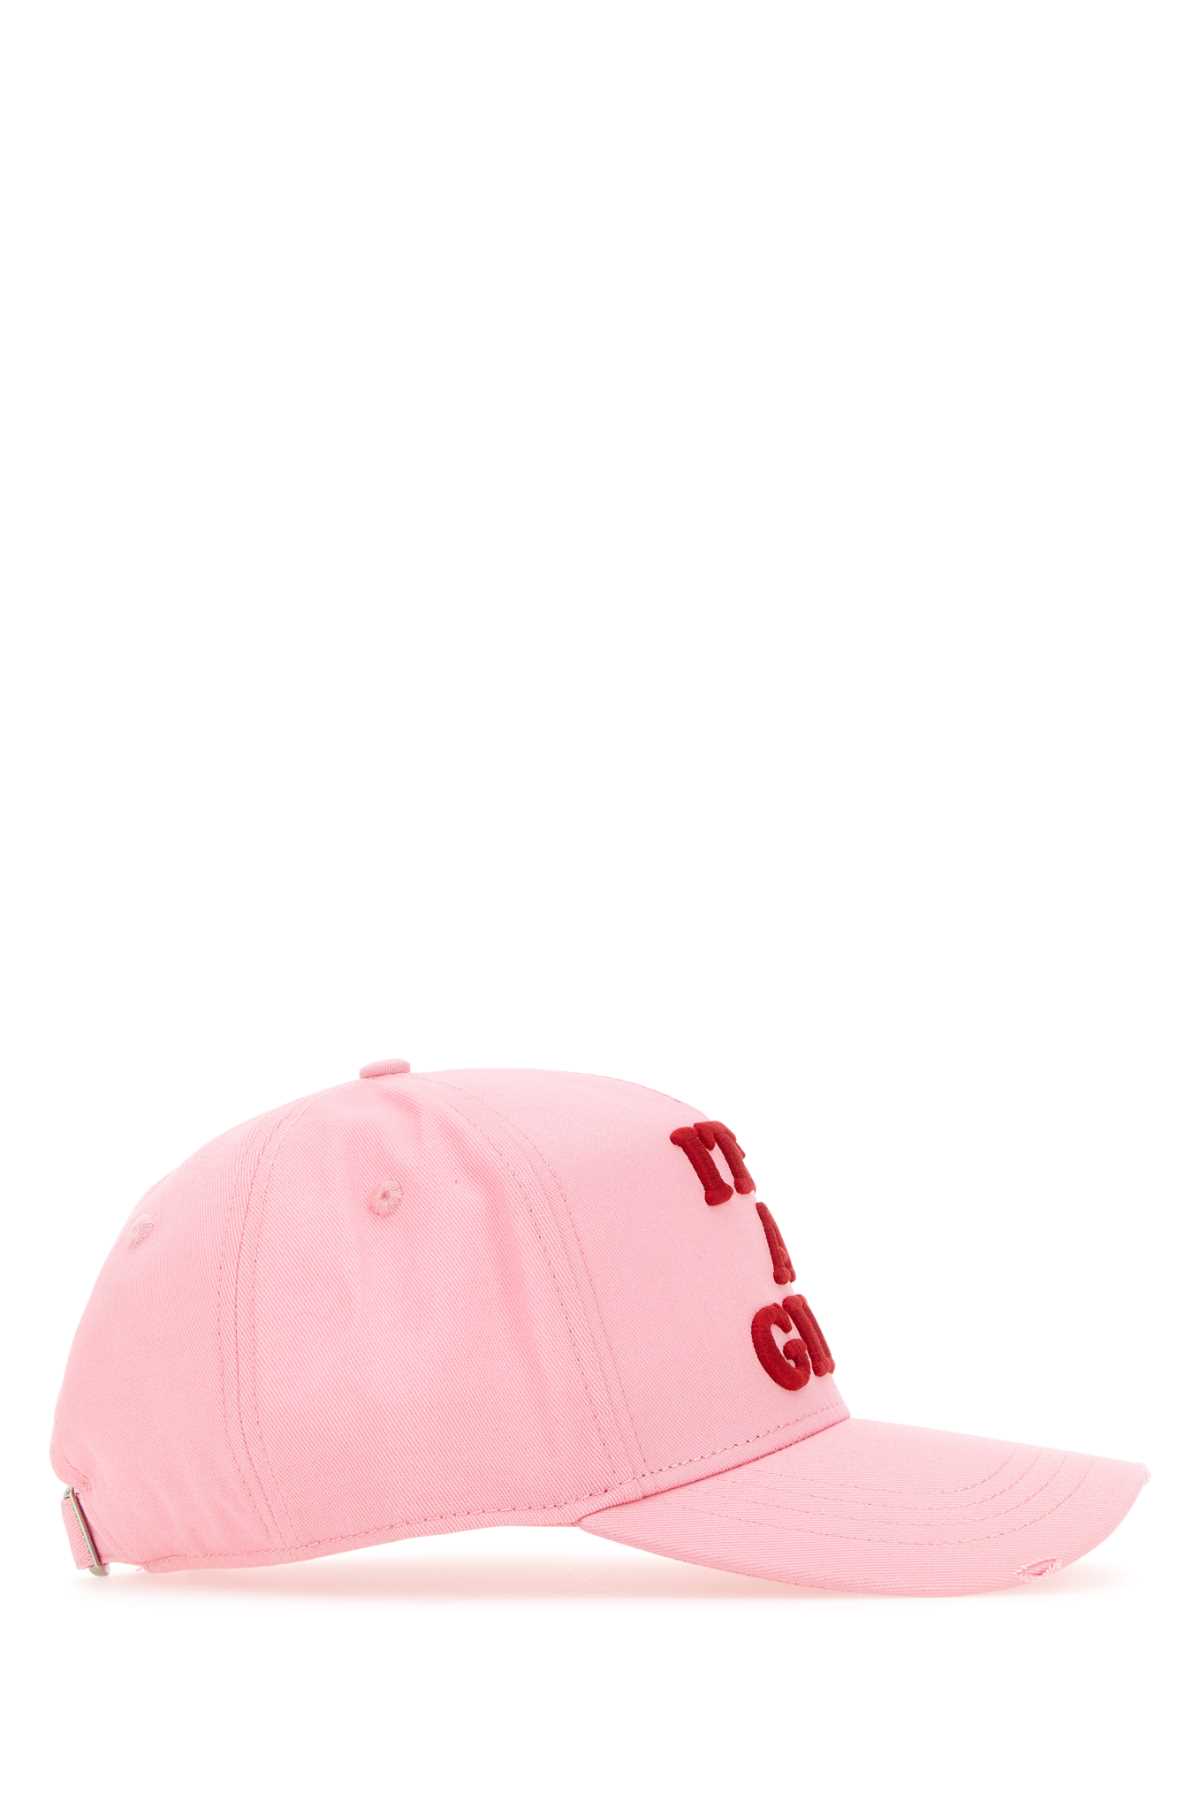 Dsquared2 Pink Cotton Baseball Cap In M1486